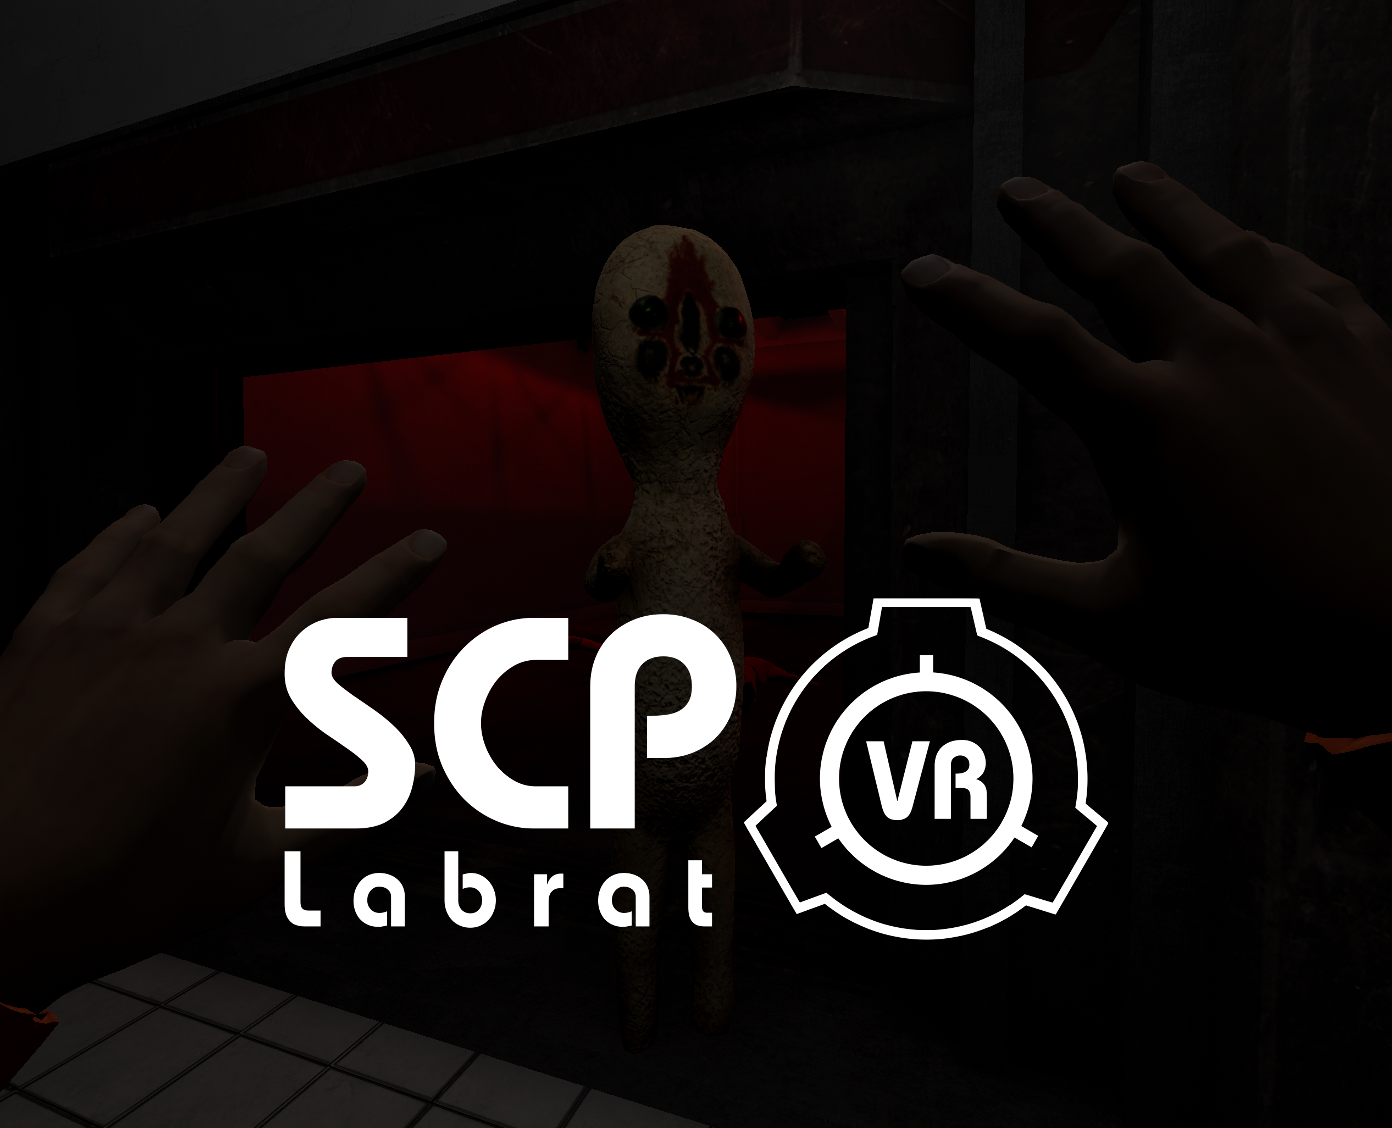 DON'T BLINK – SCP Containment Breach REVIEW